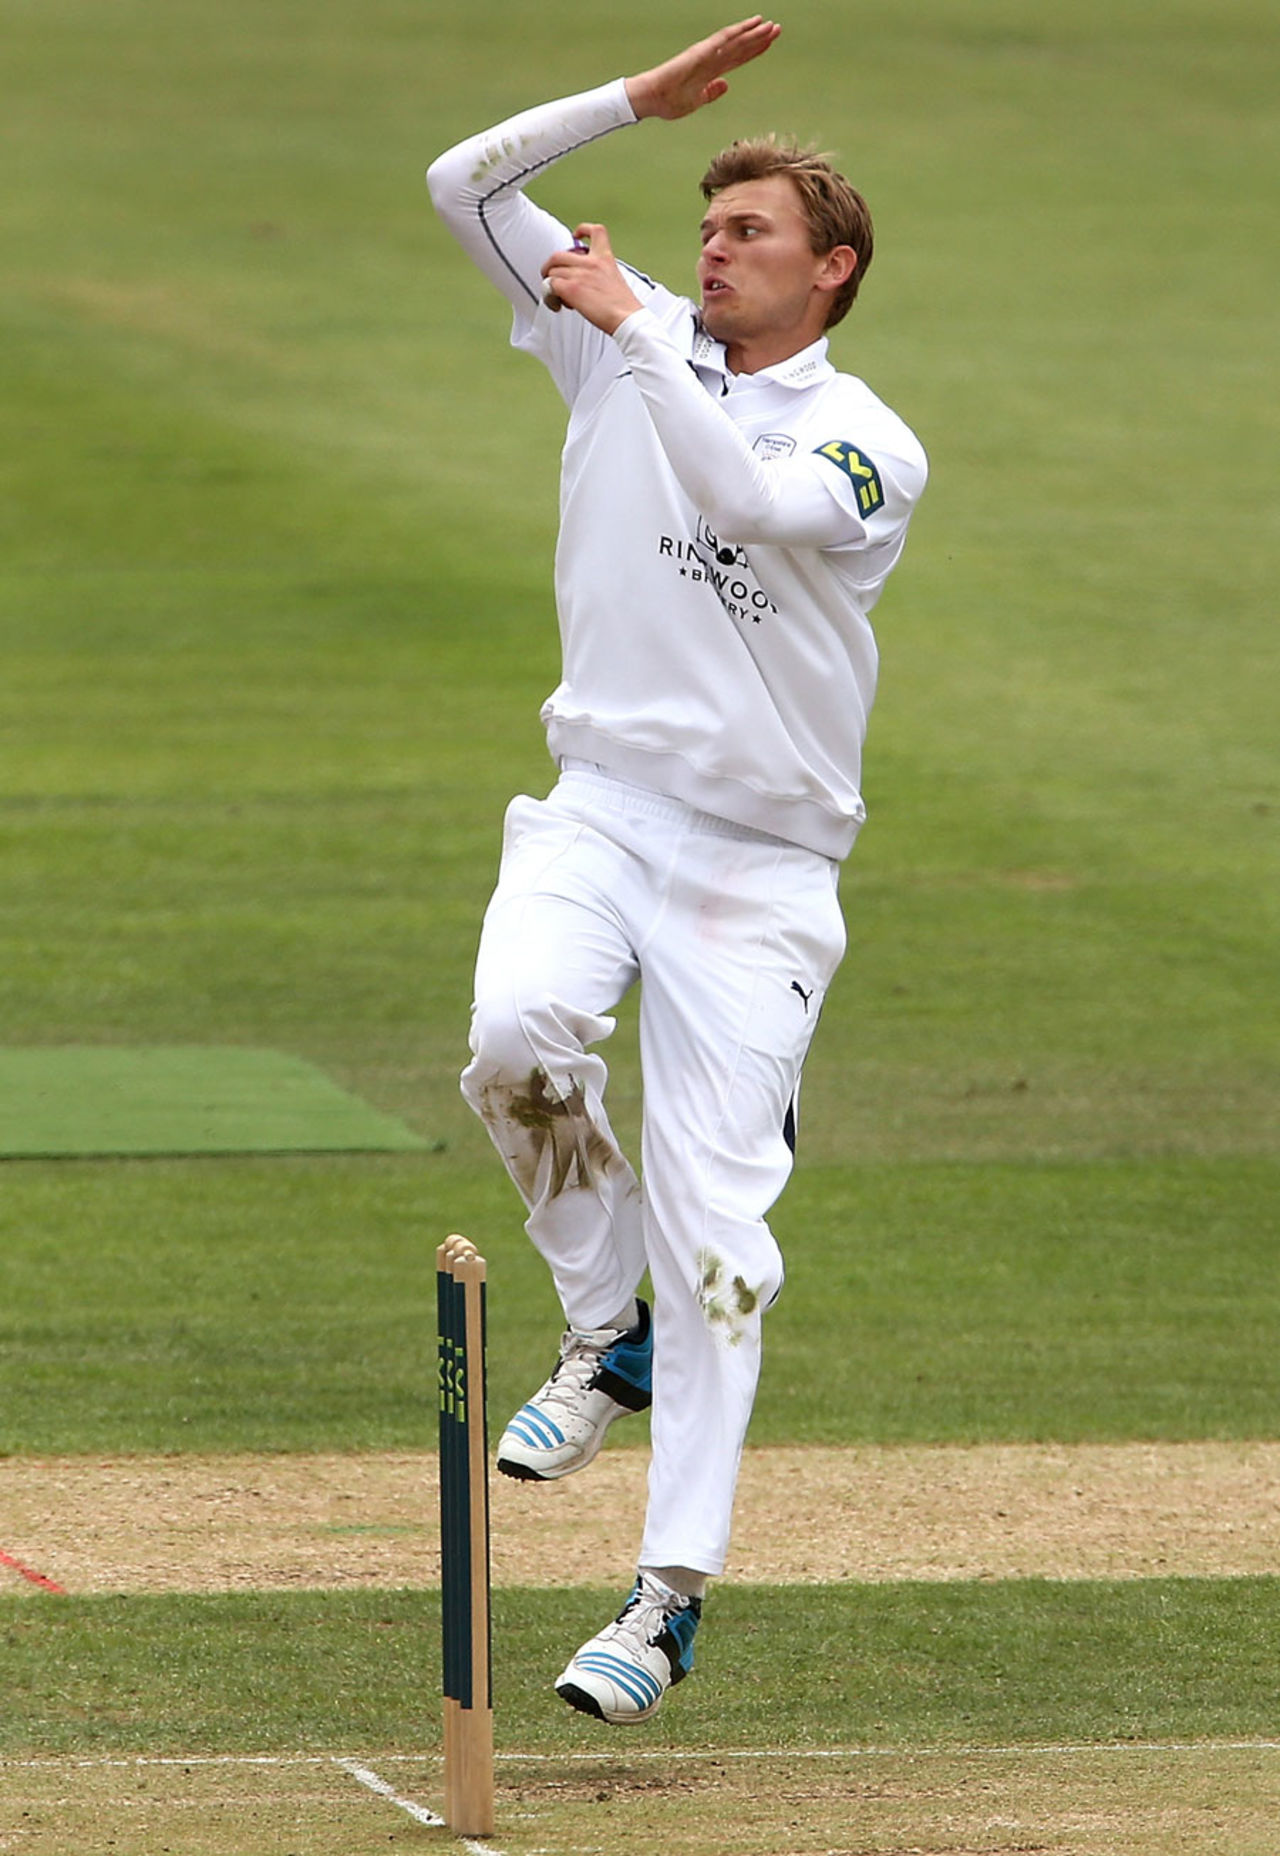 Danny Briggs' first two overs were maidens, Hampshire v Gloucestershire, County Championship Division Two, Ageas Bowl, 2nd day, July 8, 2014